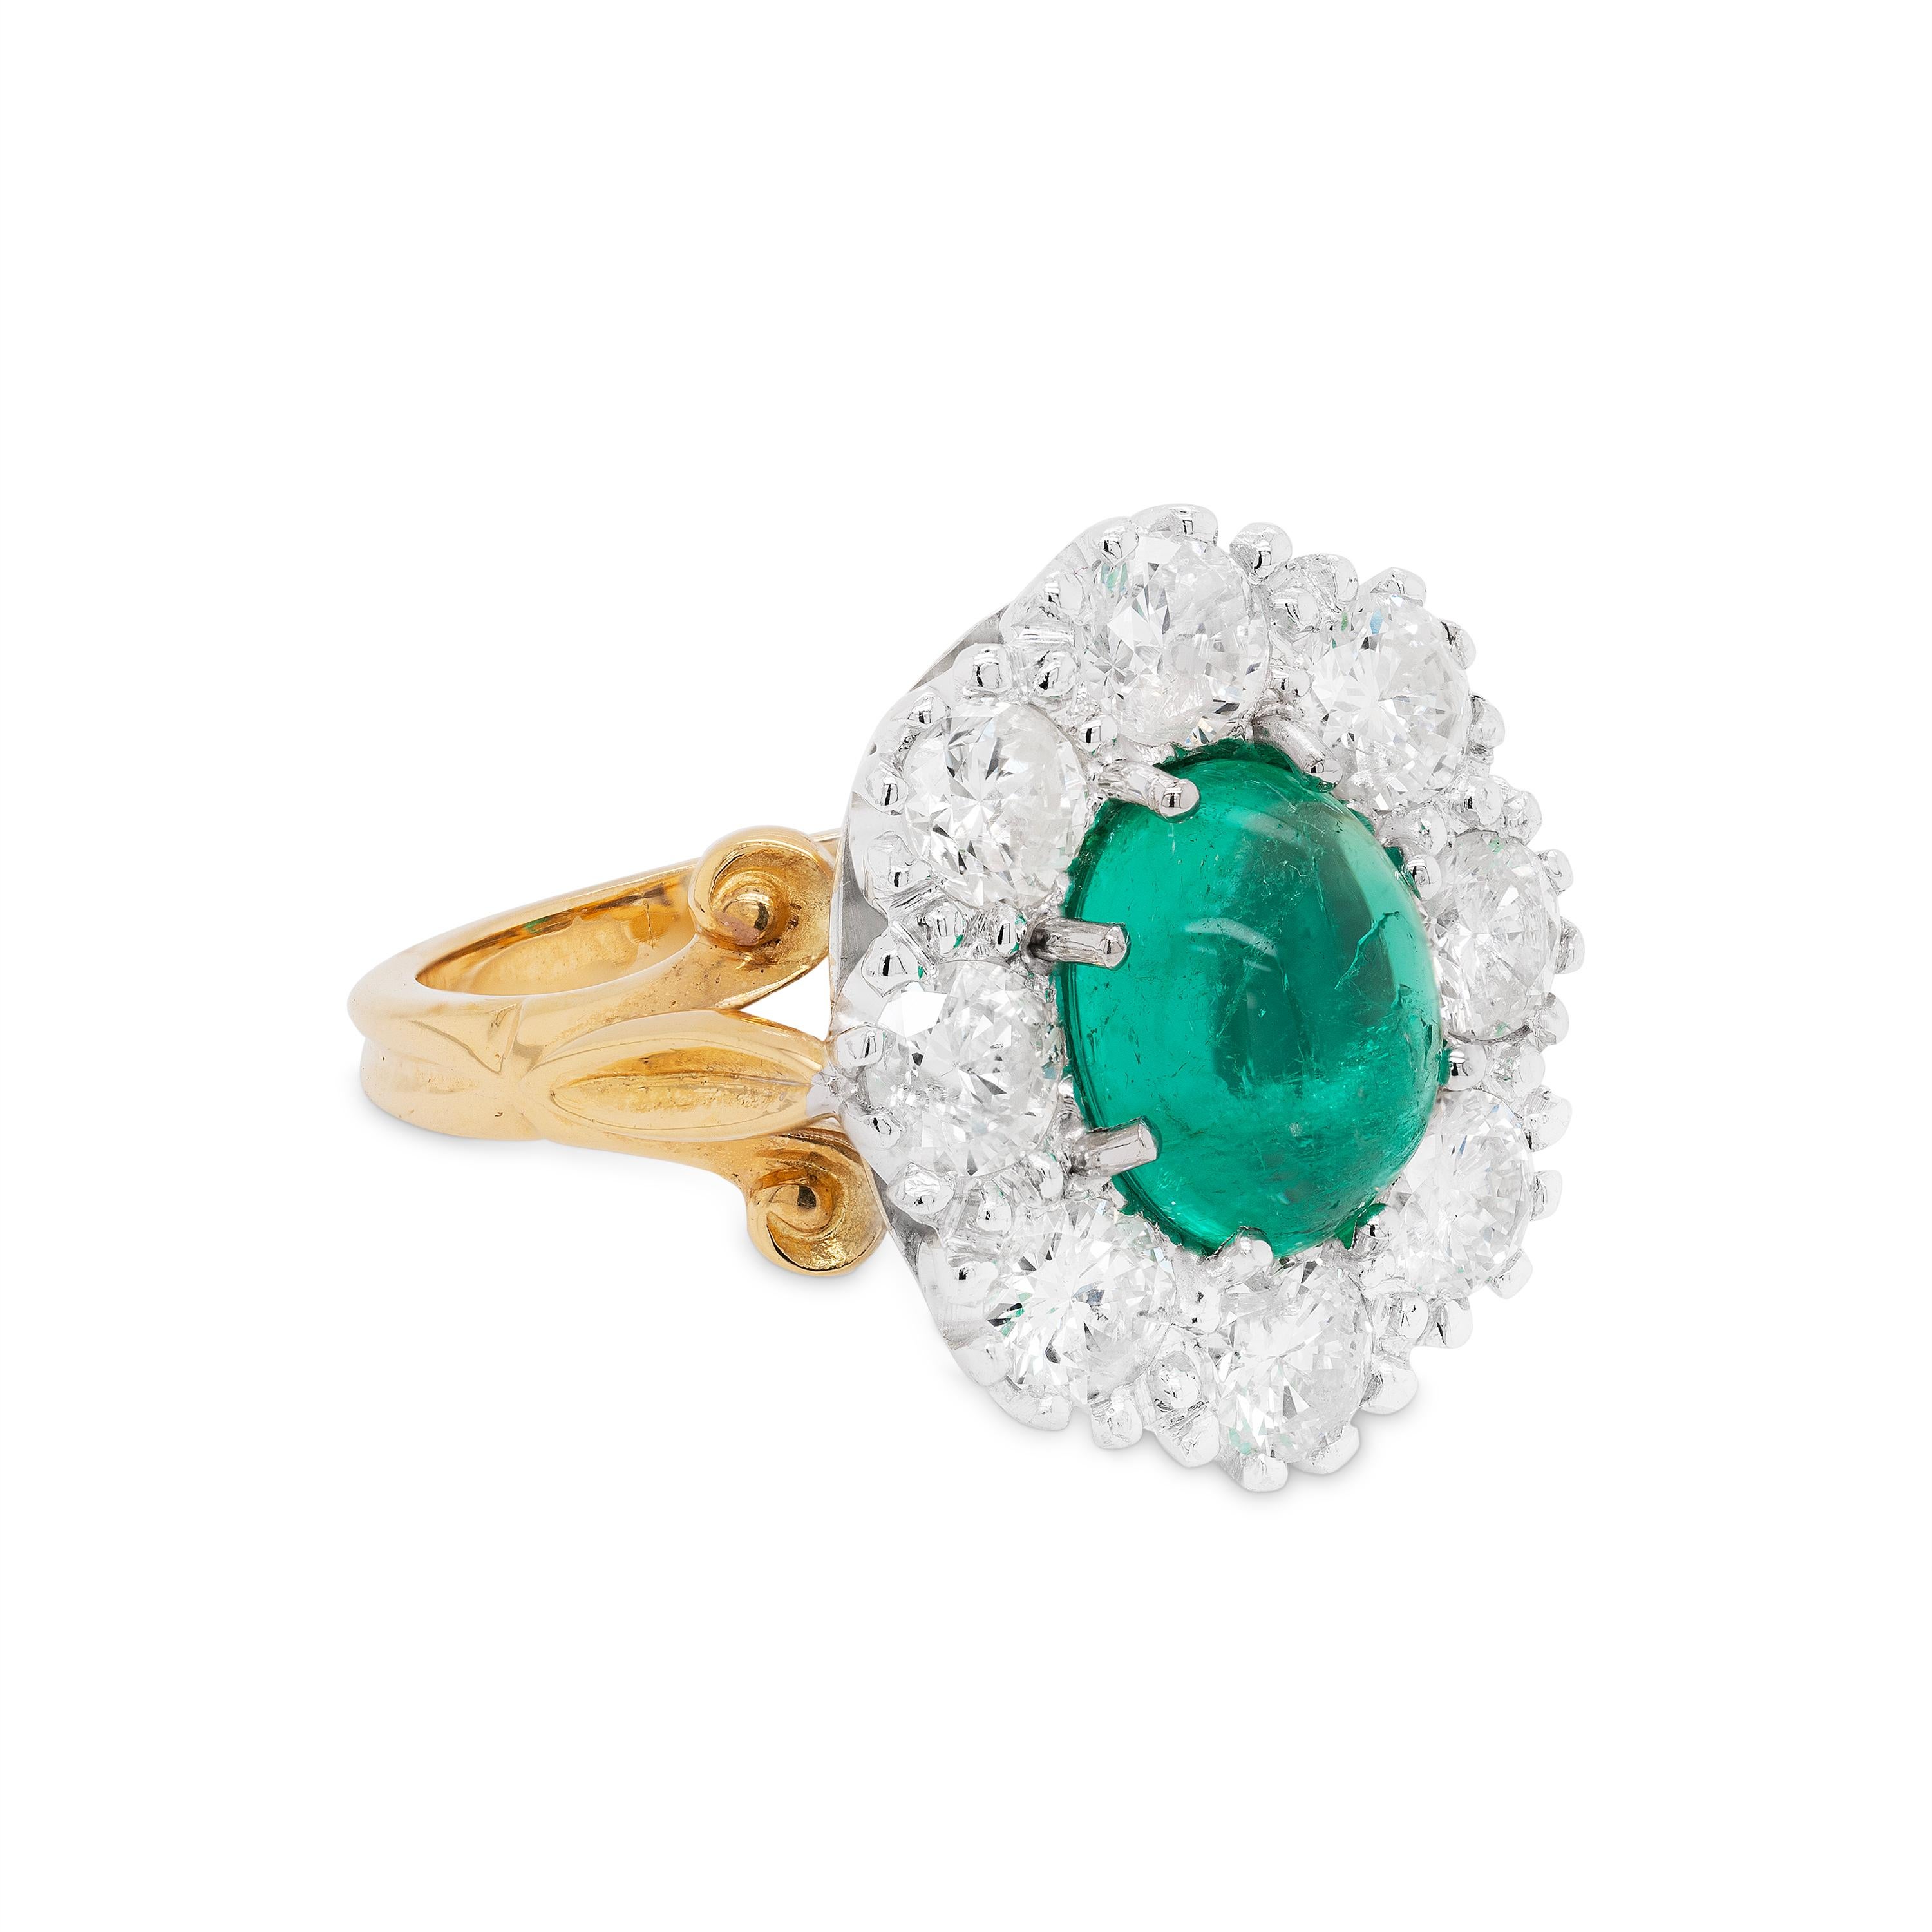 This wonderful coronet cluster engagement ring features a cabochon emerald of a beautiful colour and great lustre  weighing approximately 2.00ct, mounted in an eight claw, open back setting. The gorgeous stone is surrounded by 8 round brilliant cut